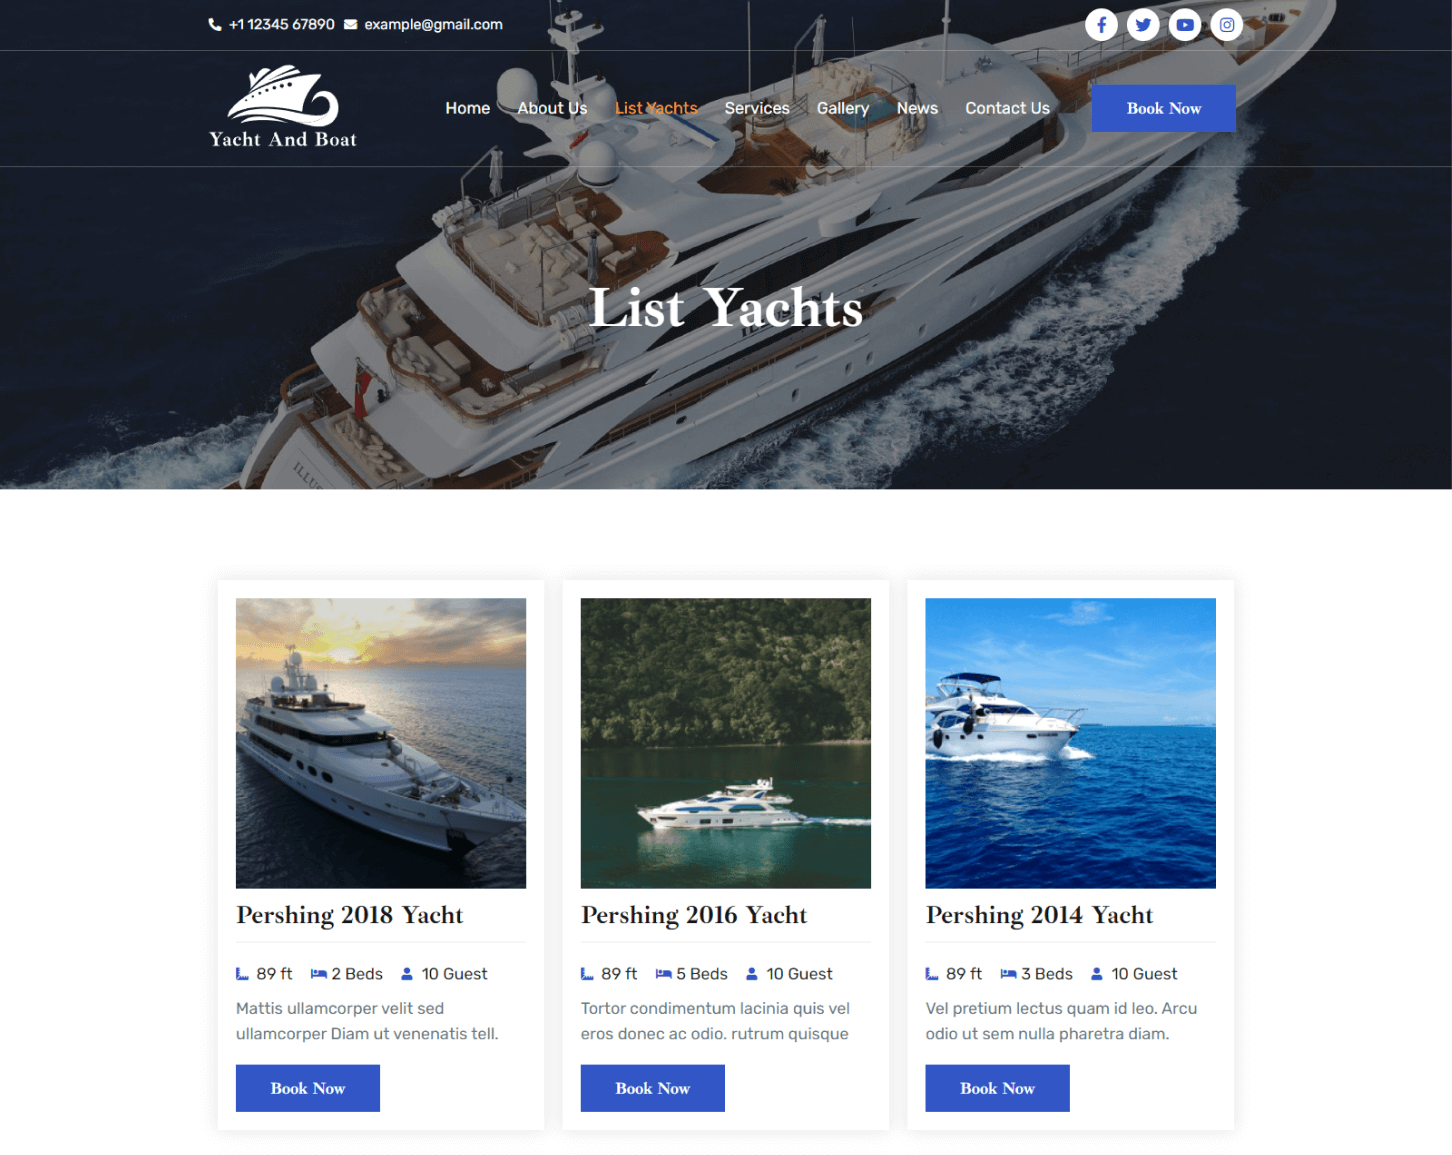 Yacht And Boat List Yachts